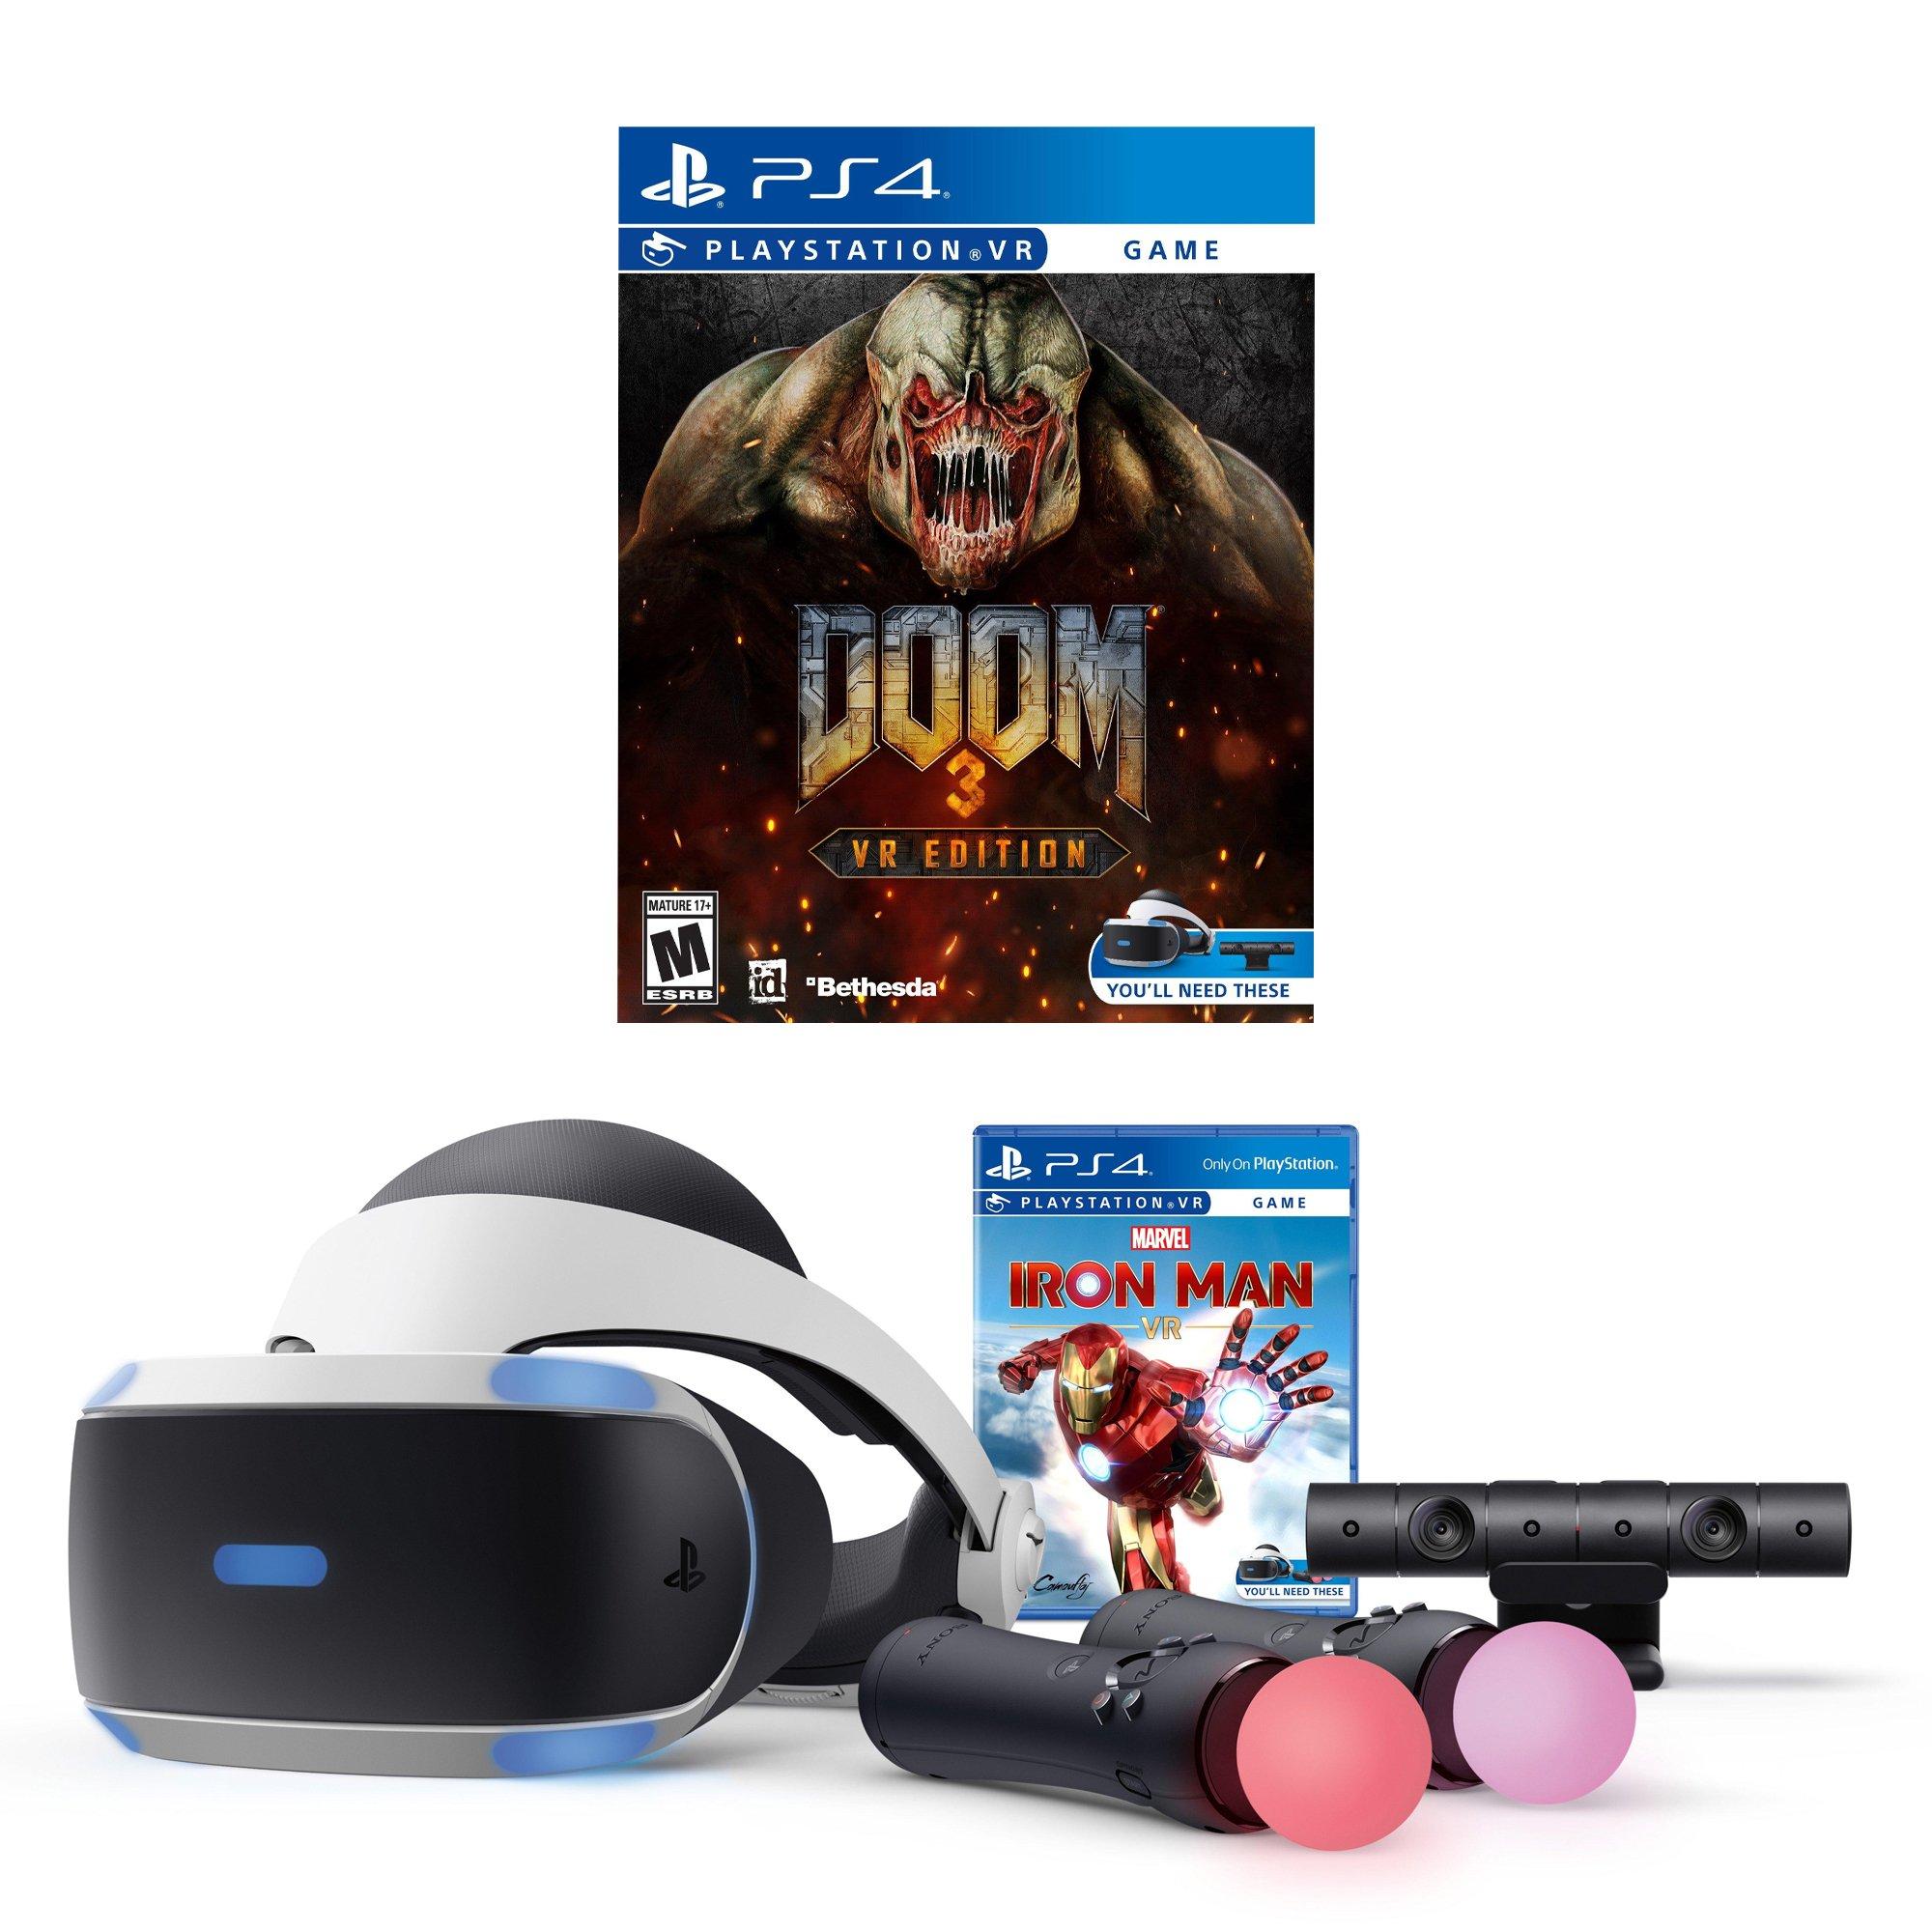 Become a superhero with this Black Friday PlayStation VR deal